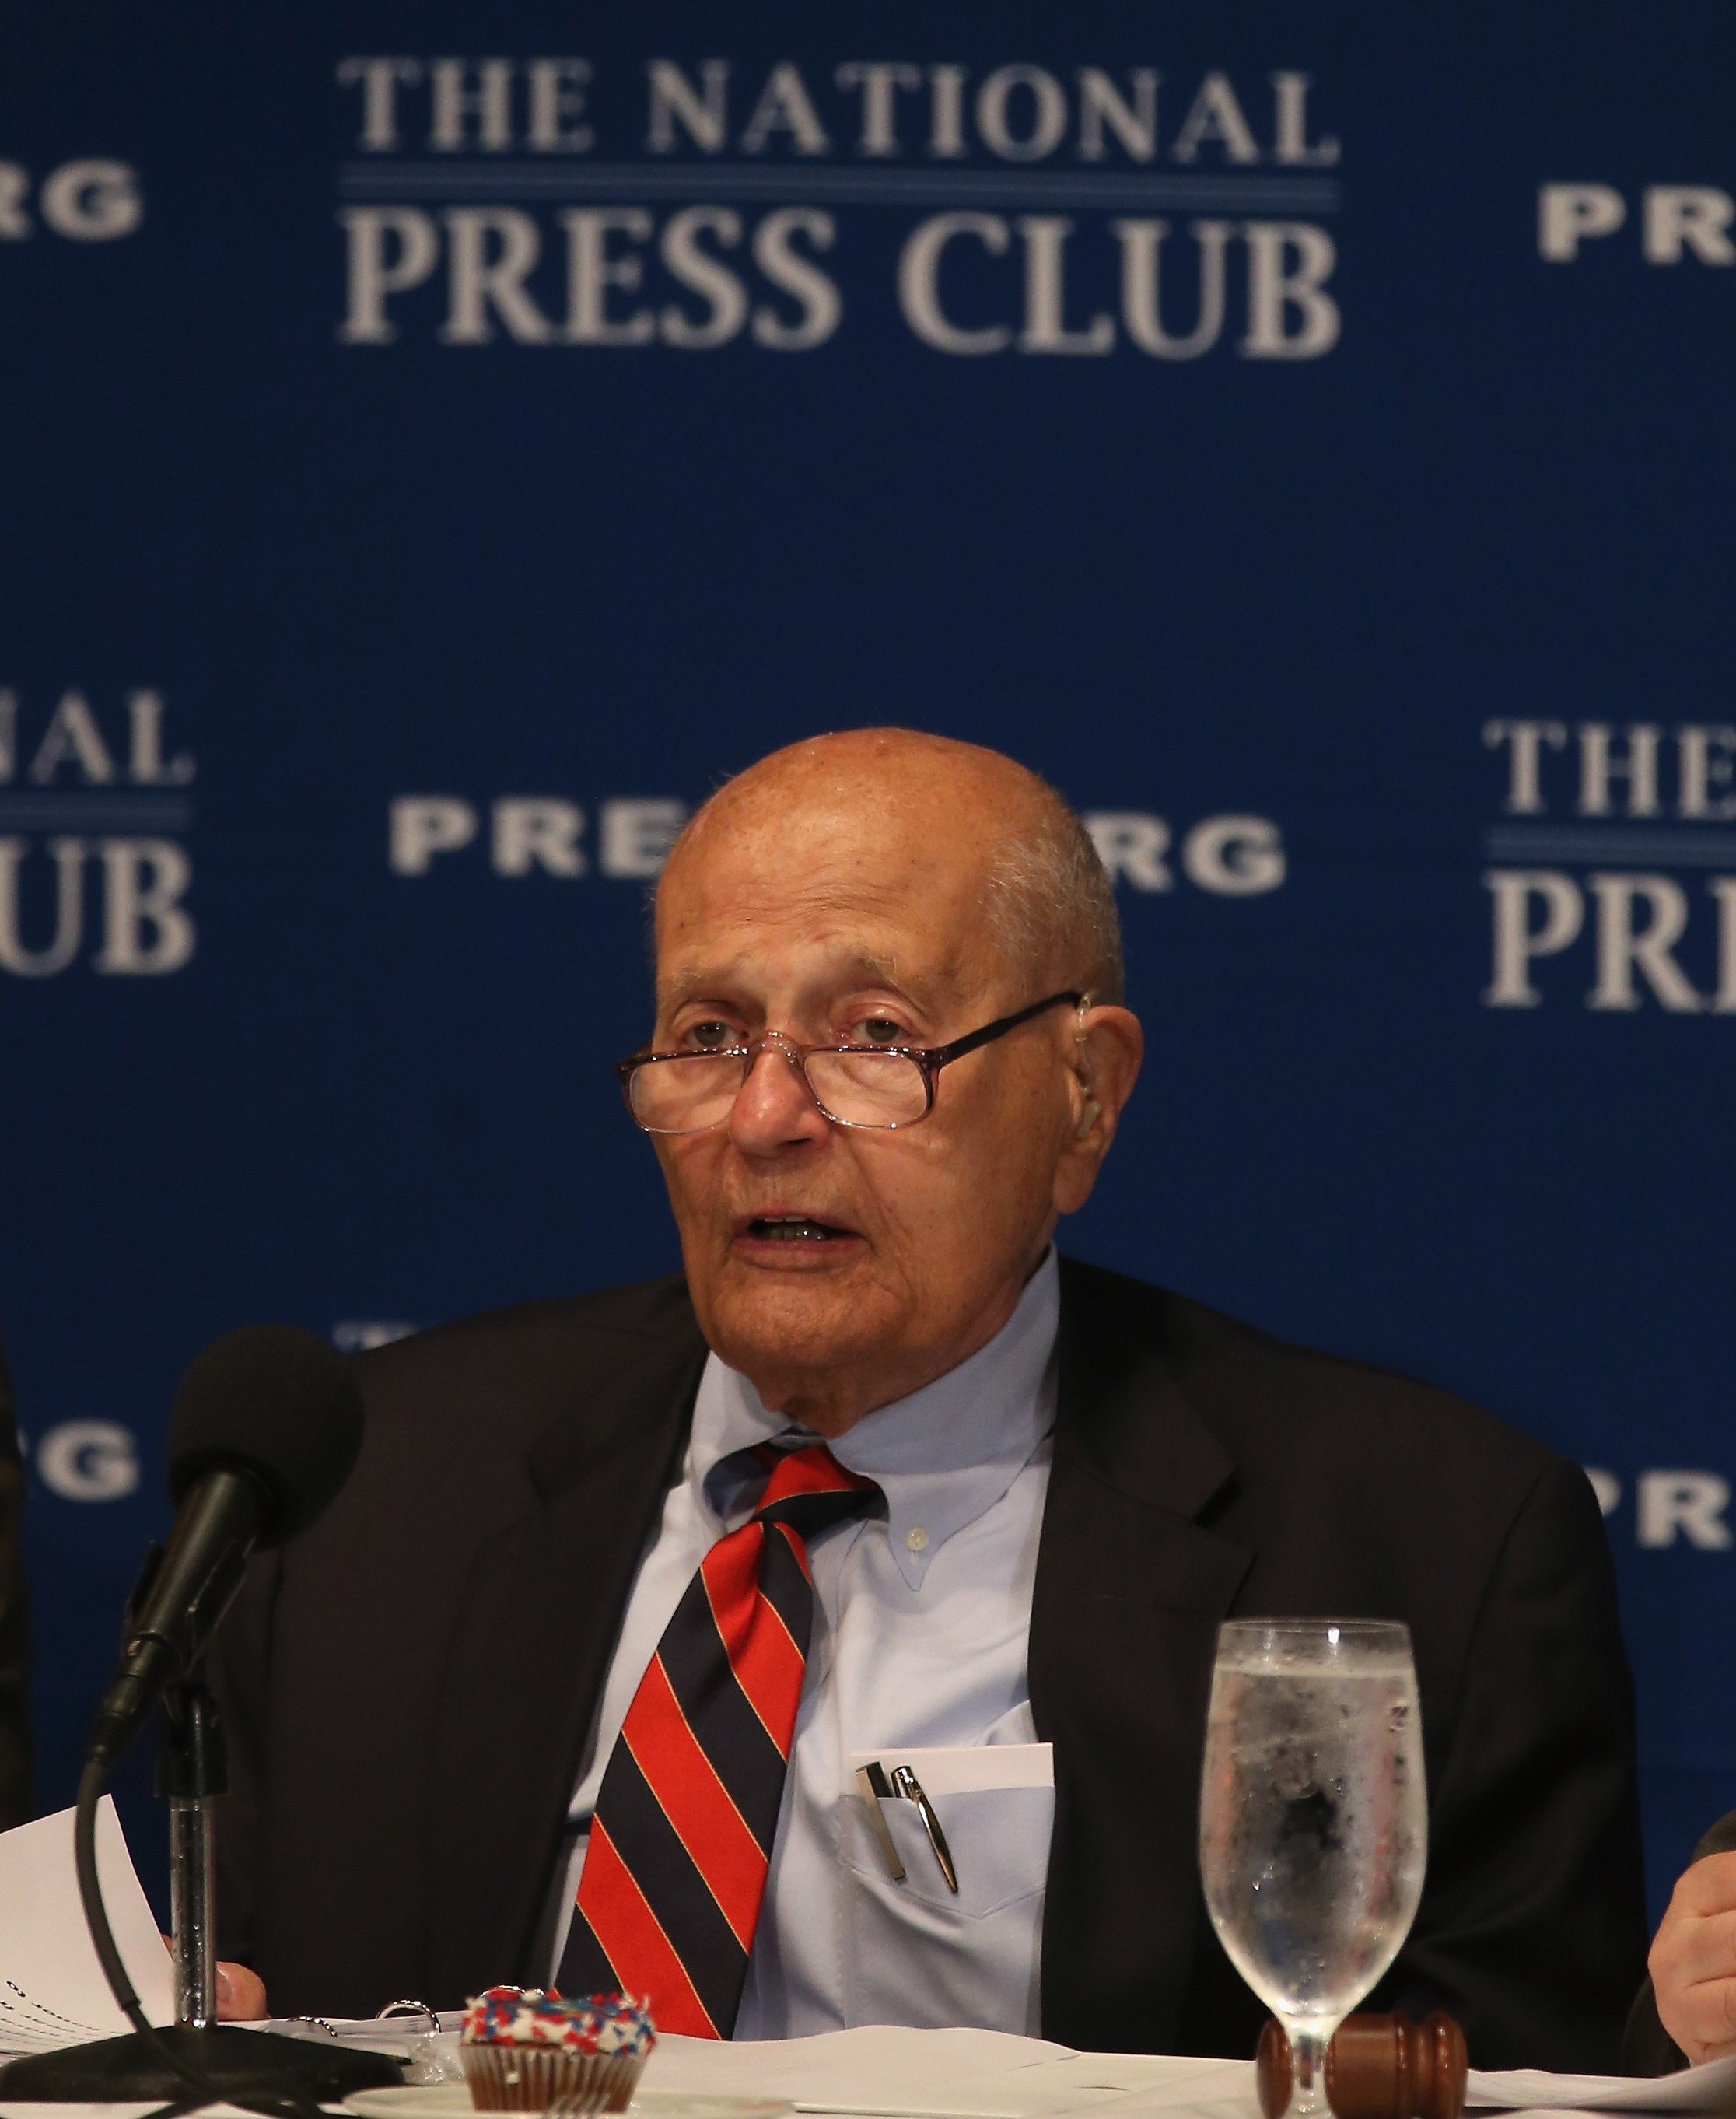 Rep. John Dingell delivering a speech at the National Press Club | Photo: Getty Images